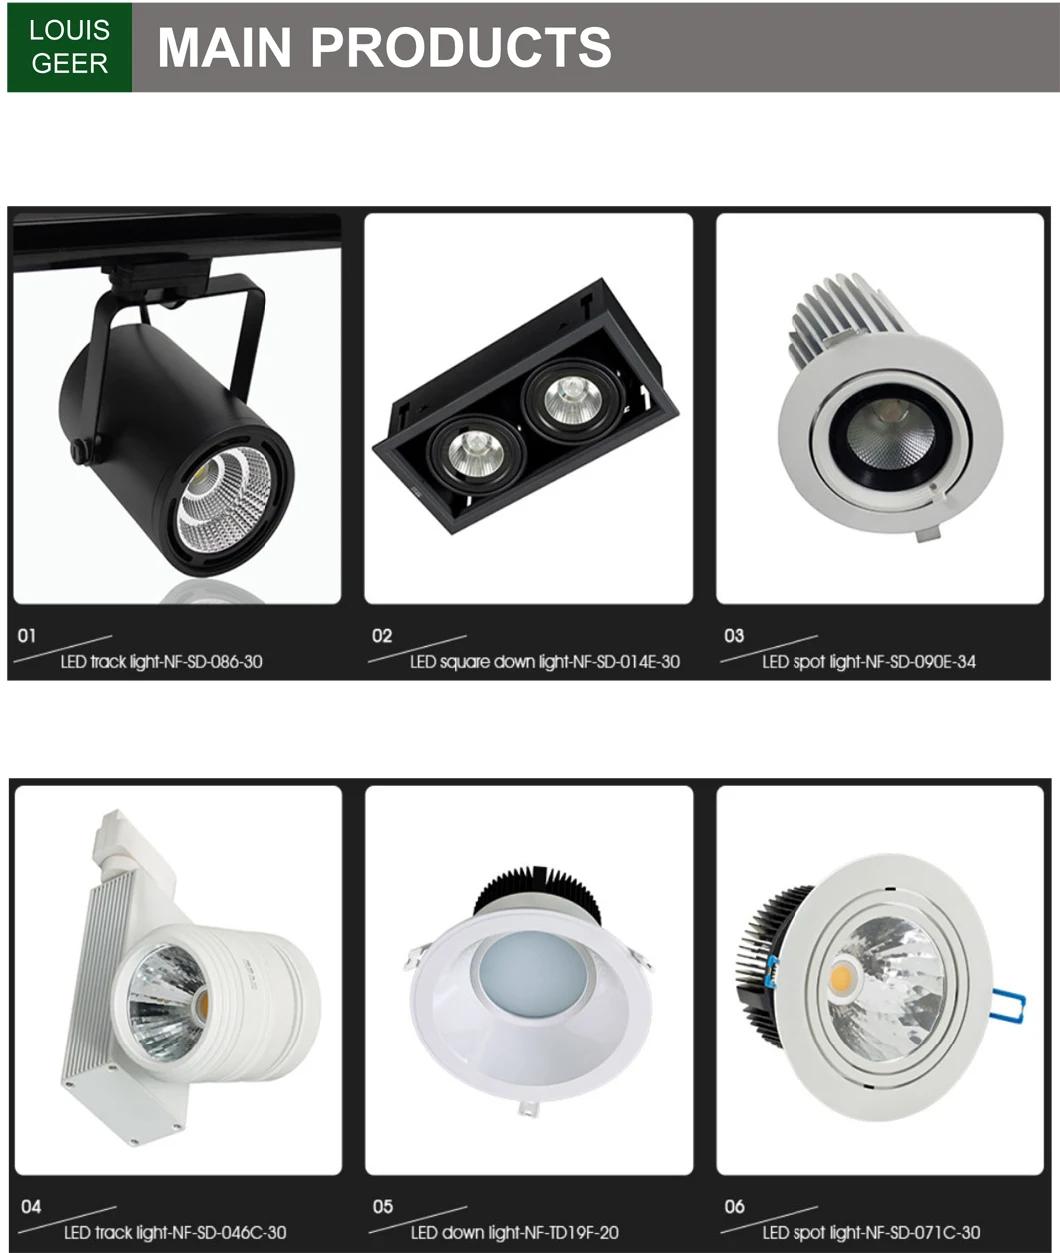 New Arrival Factory Price Adjustable LED Track Light 12W Focusable Simple LED Tracking Light